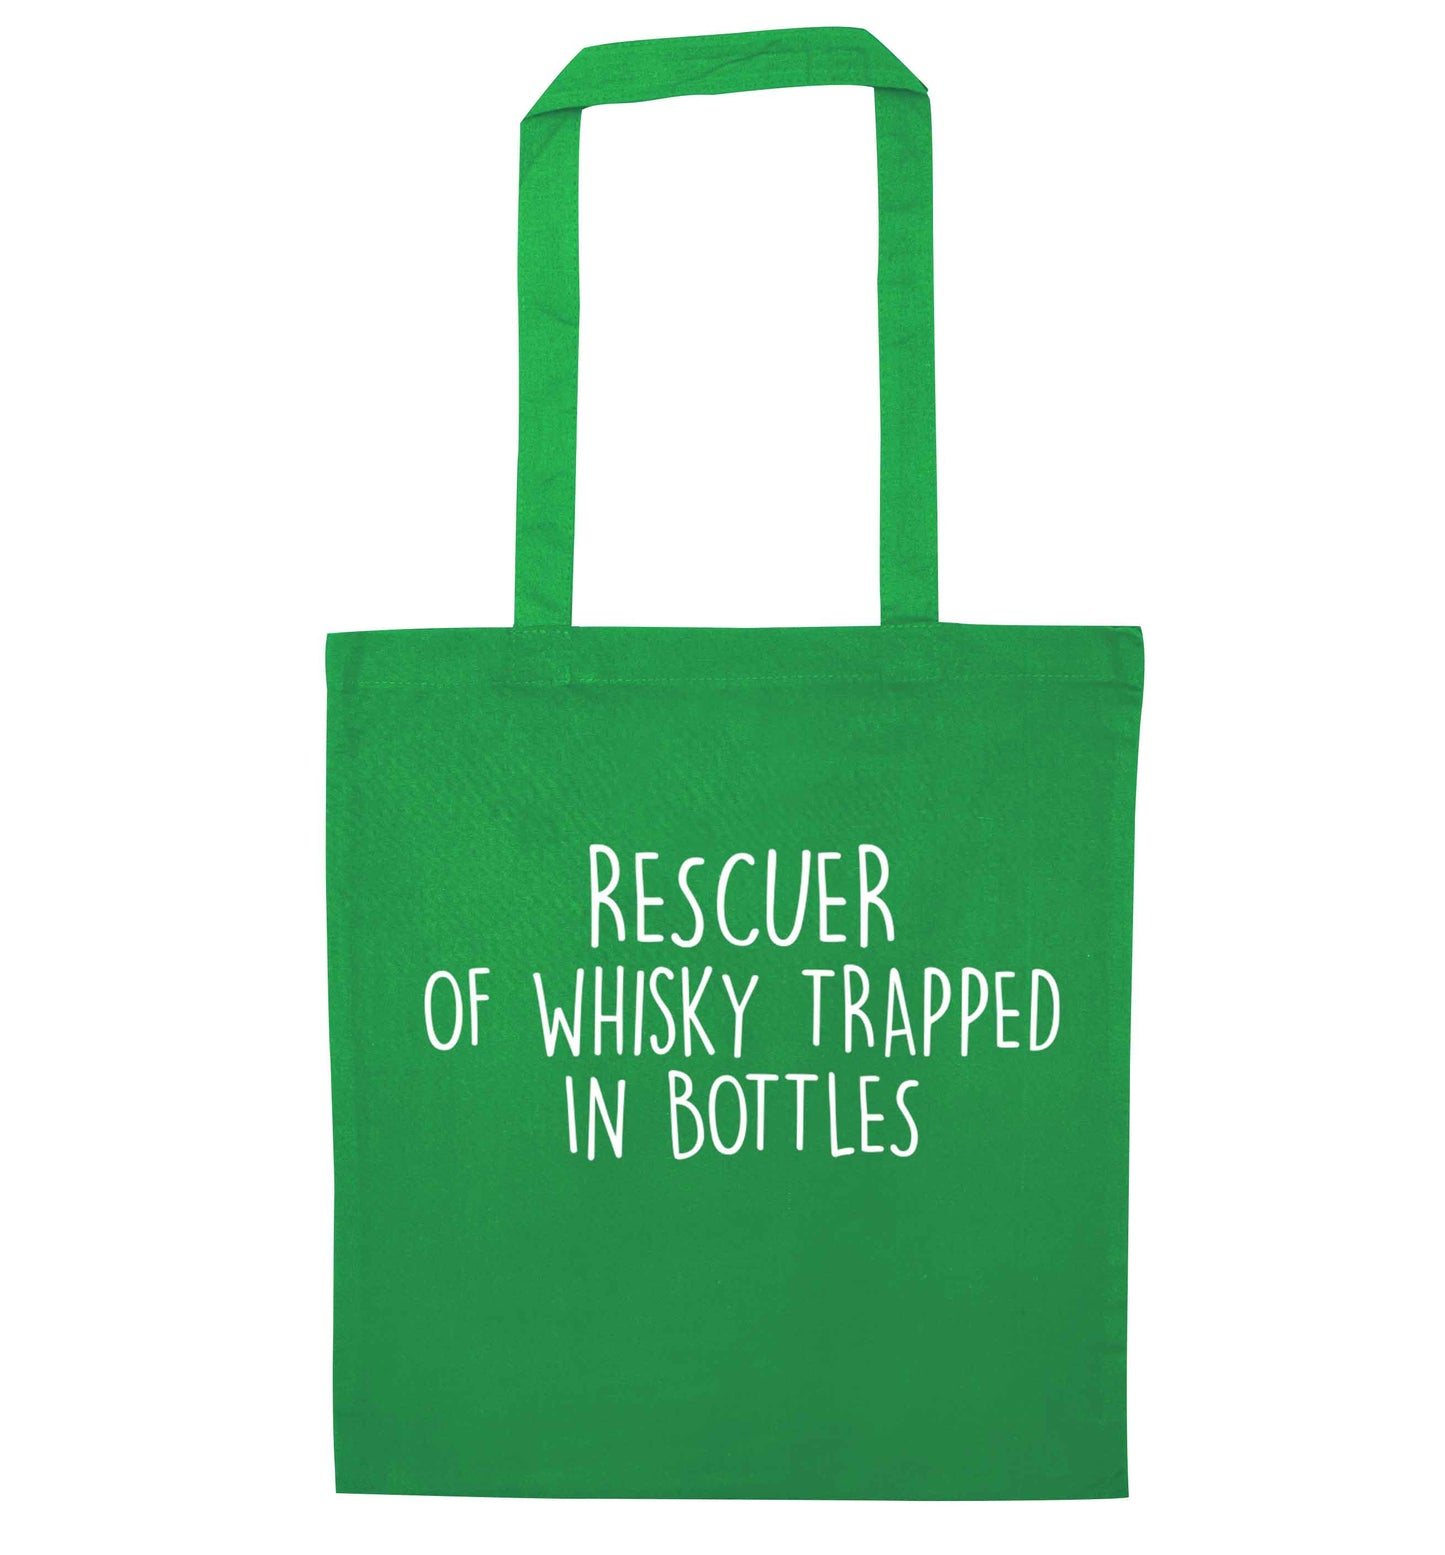 Rescuer of whisky trapped in bottles green tote bag